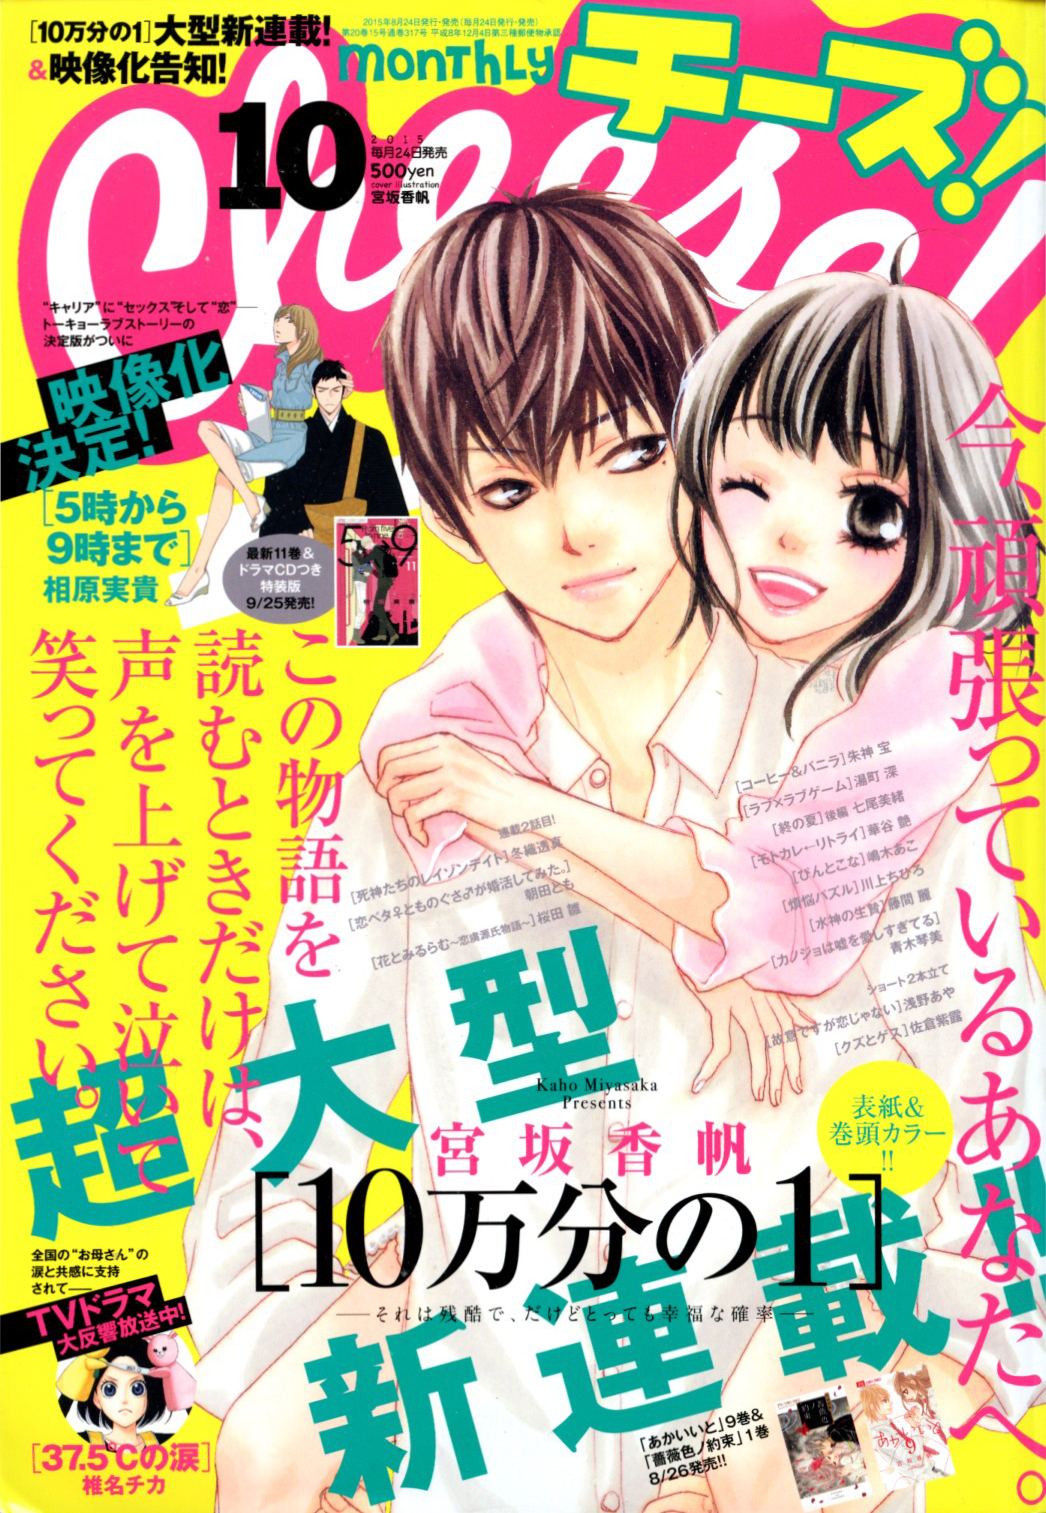 Highlights from Cheese! Issues 7 -10 | Lovely Manga